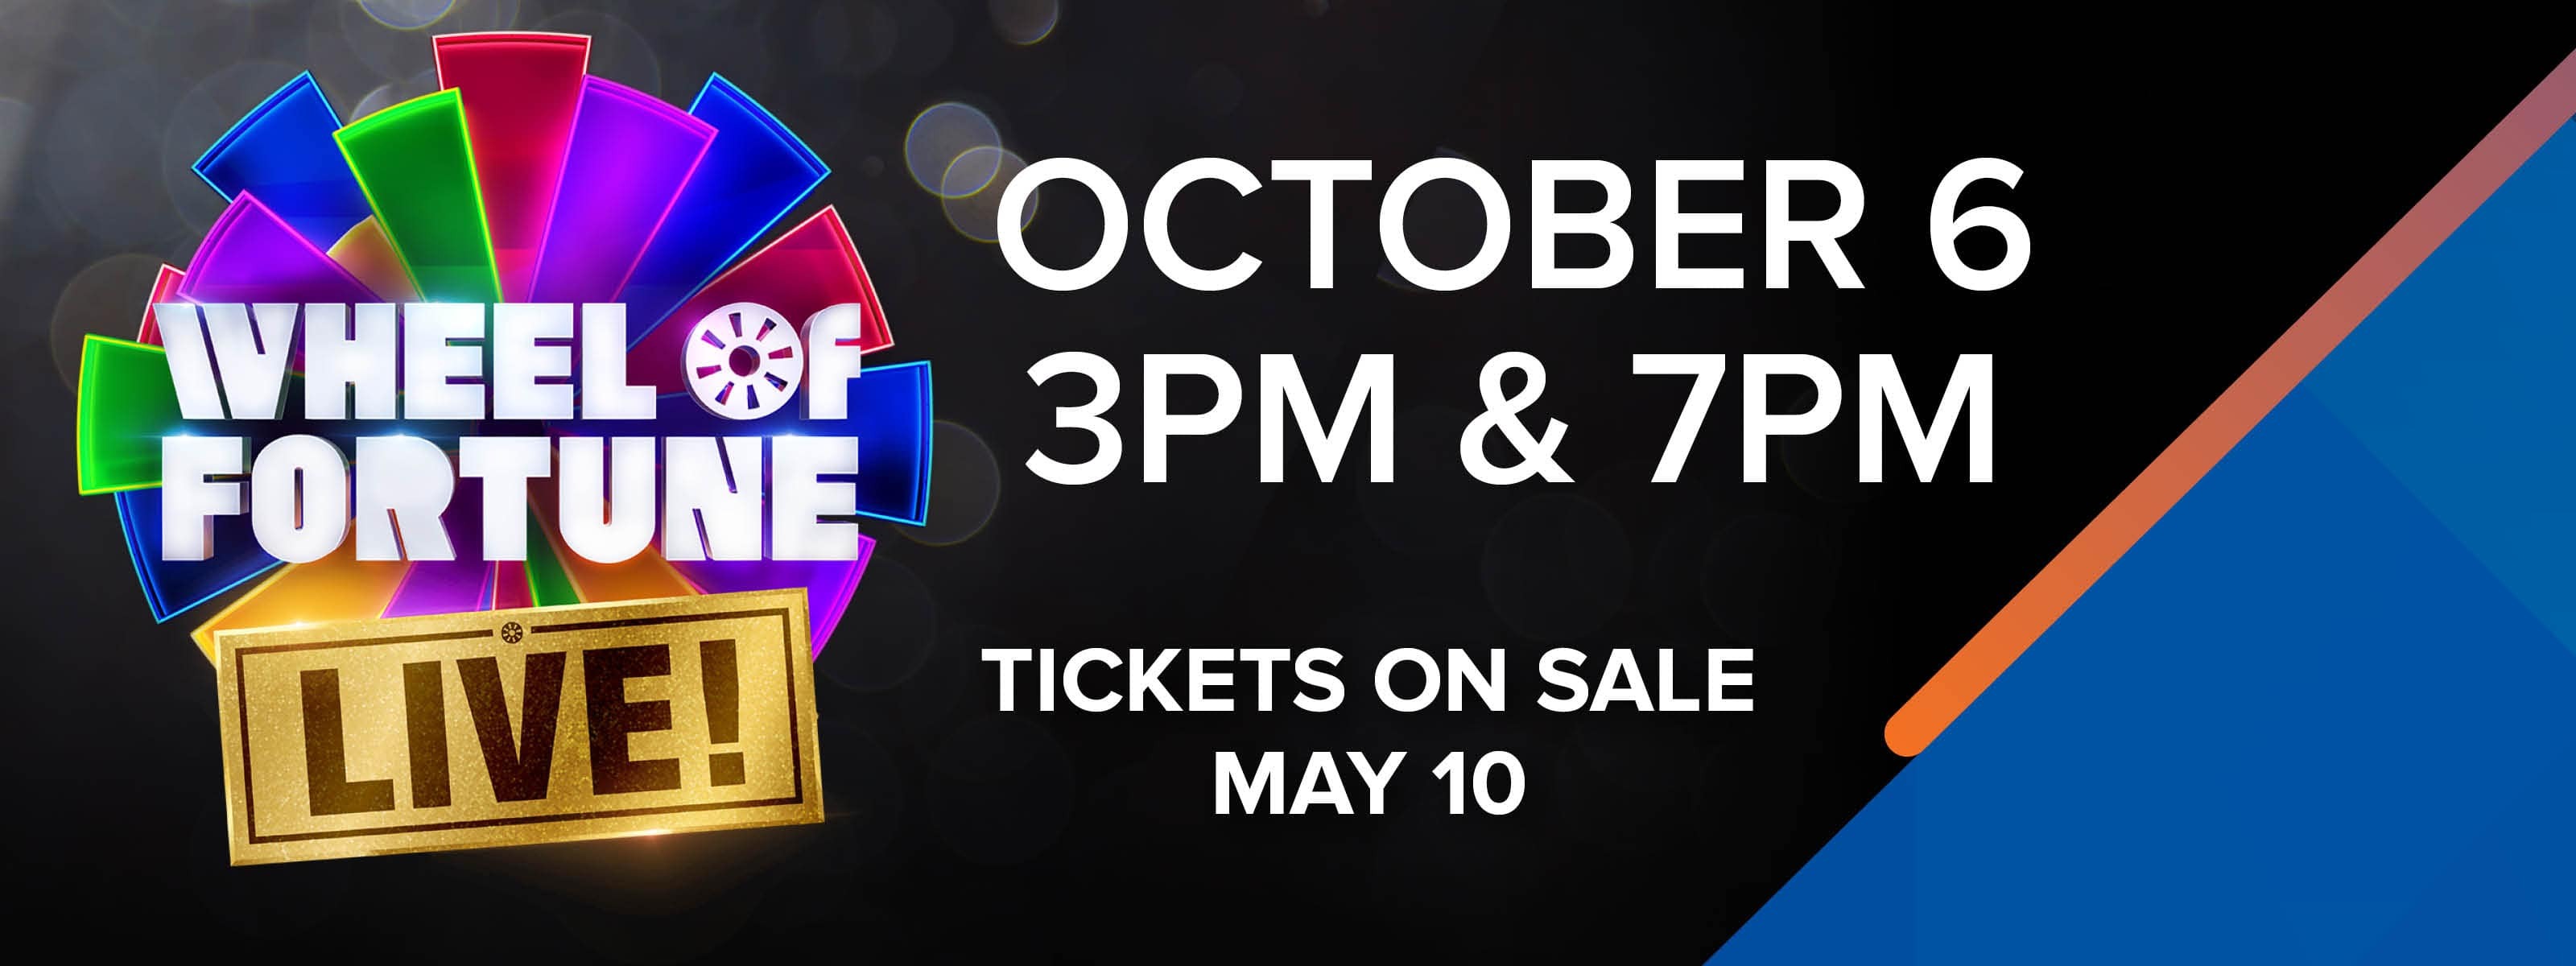 Wheel of Fortune LIVE! October 6, 3 and 7pm - Tickets On Sale May 10